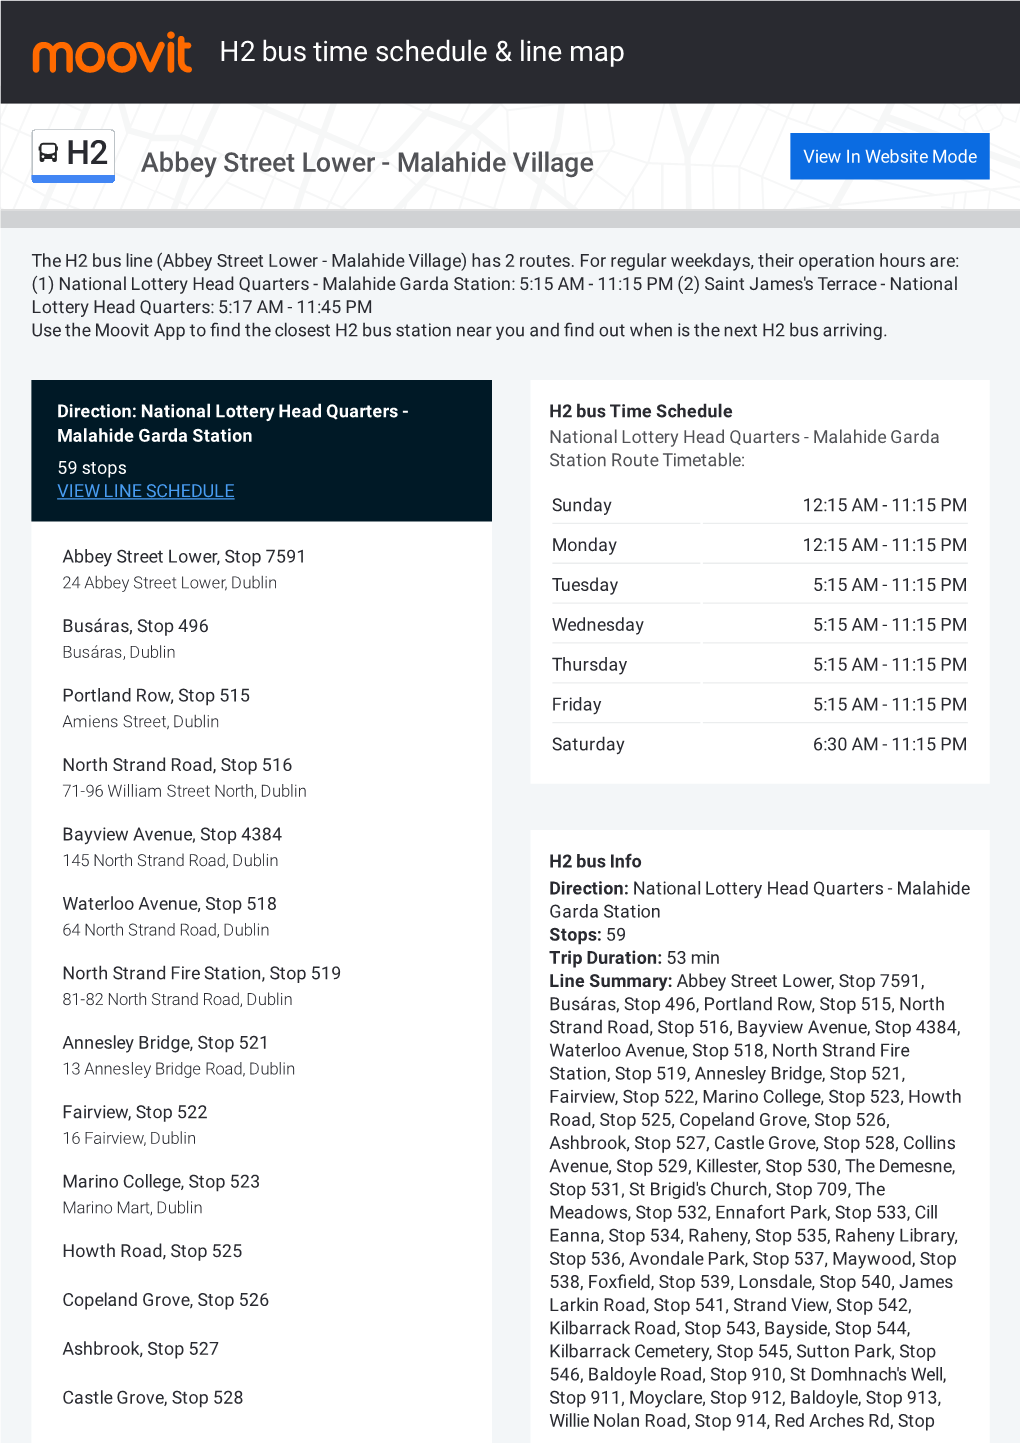 H2 Bus Time Schedule & Line Route